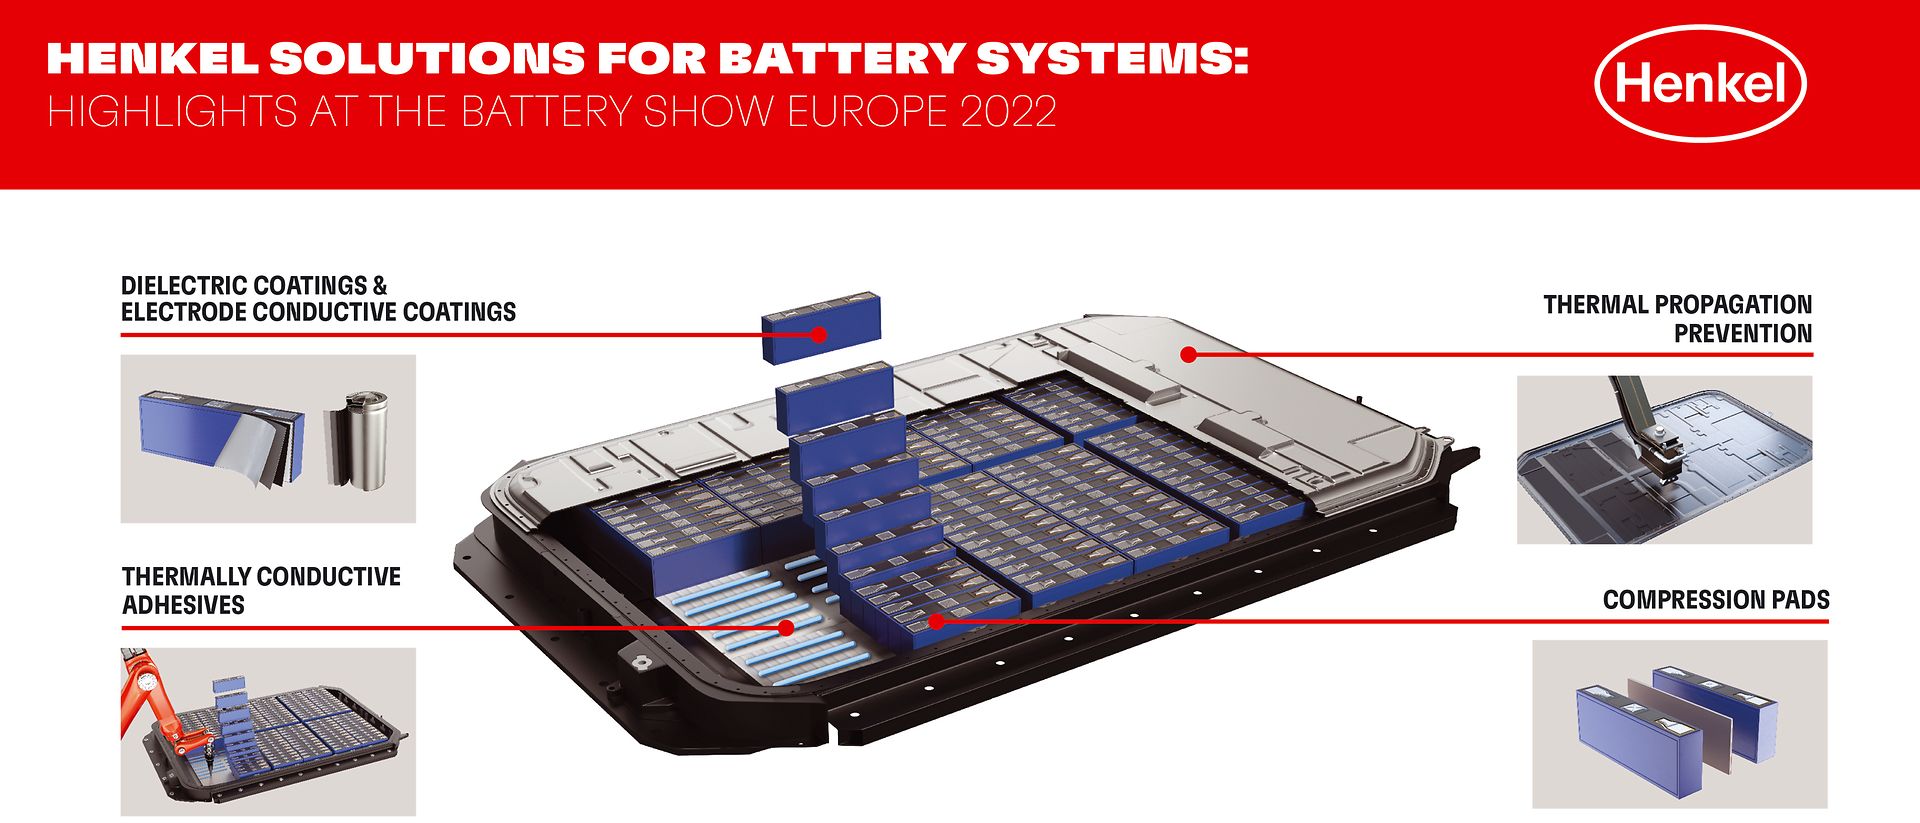 
At this year’s battery show Henkel will provide an opportunity to learn more about its solutions and products in different areas.